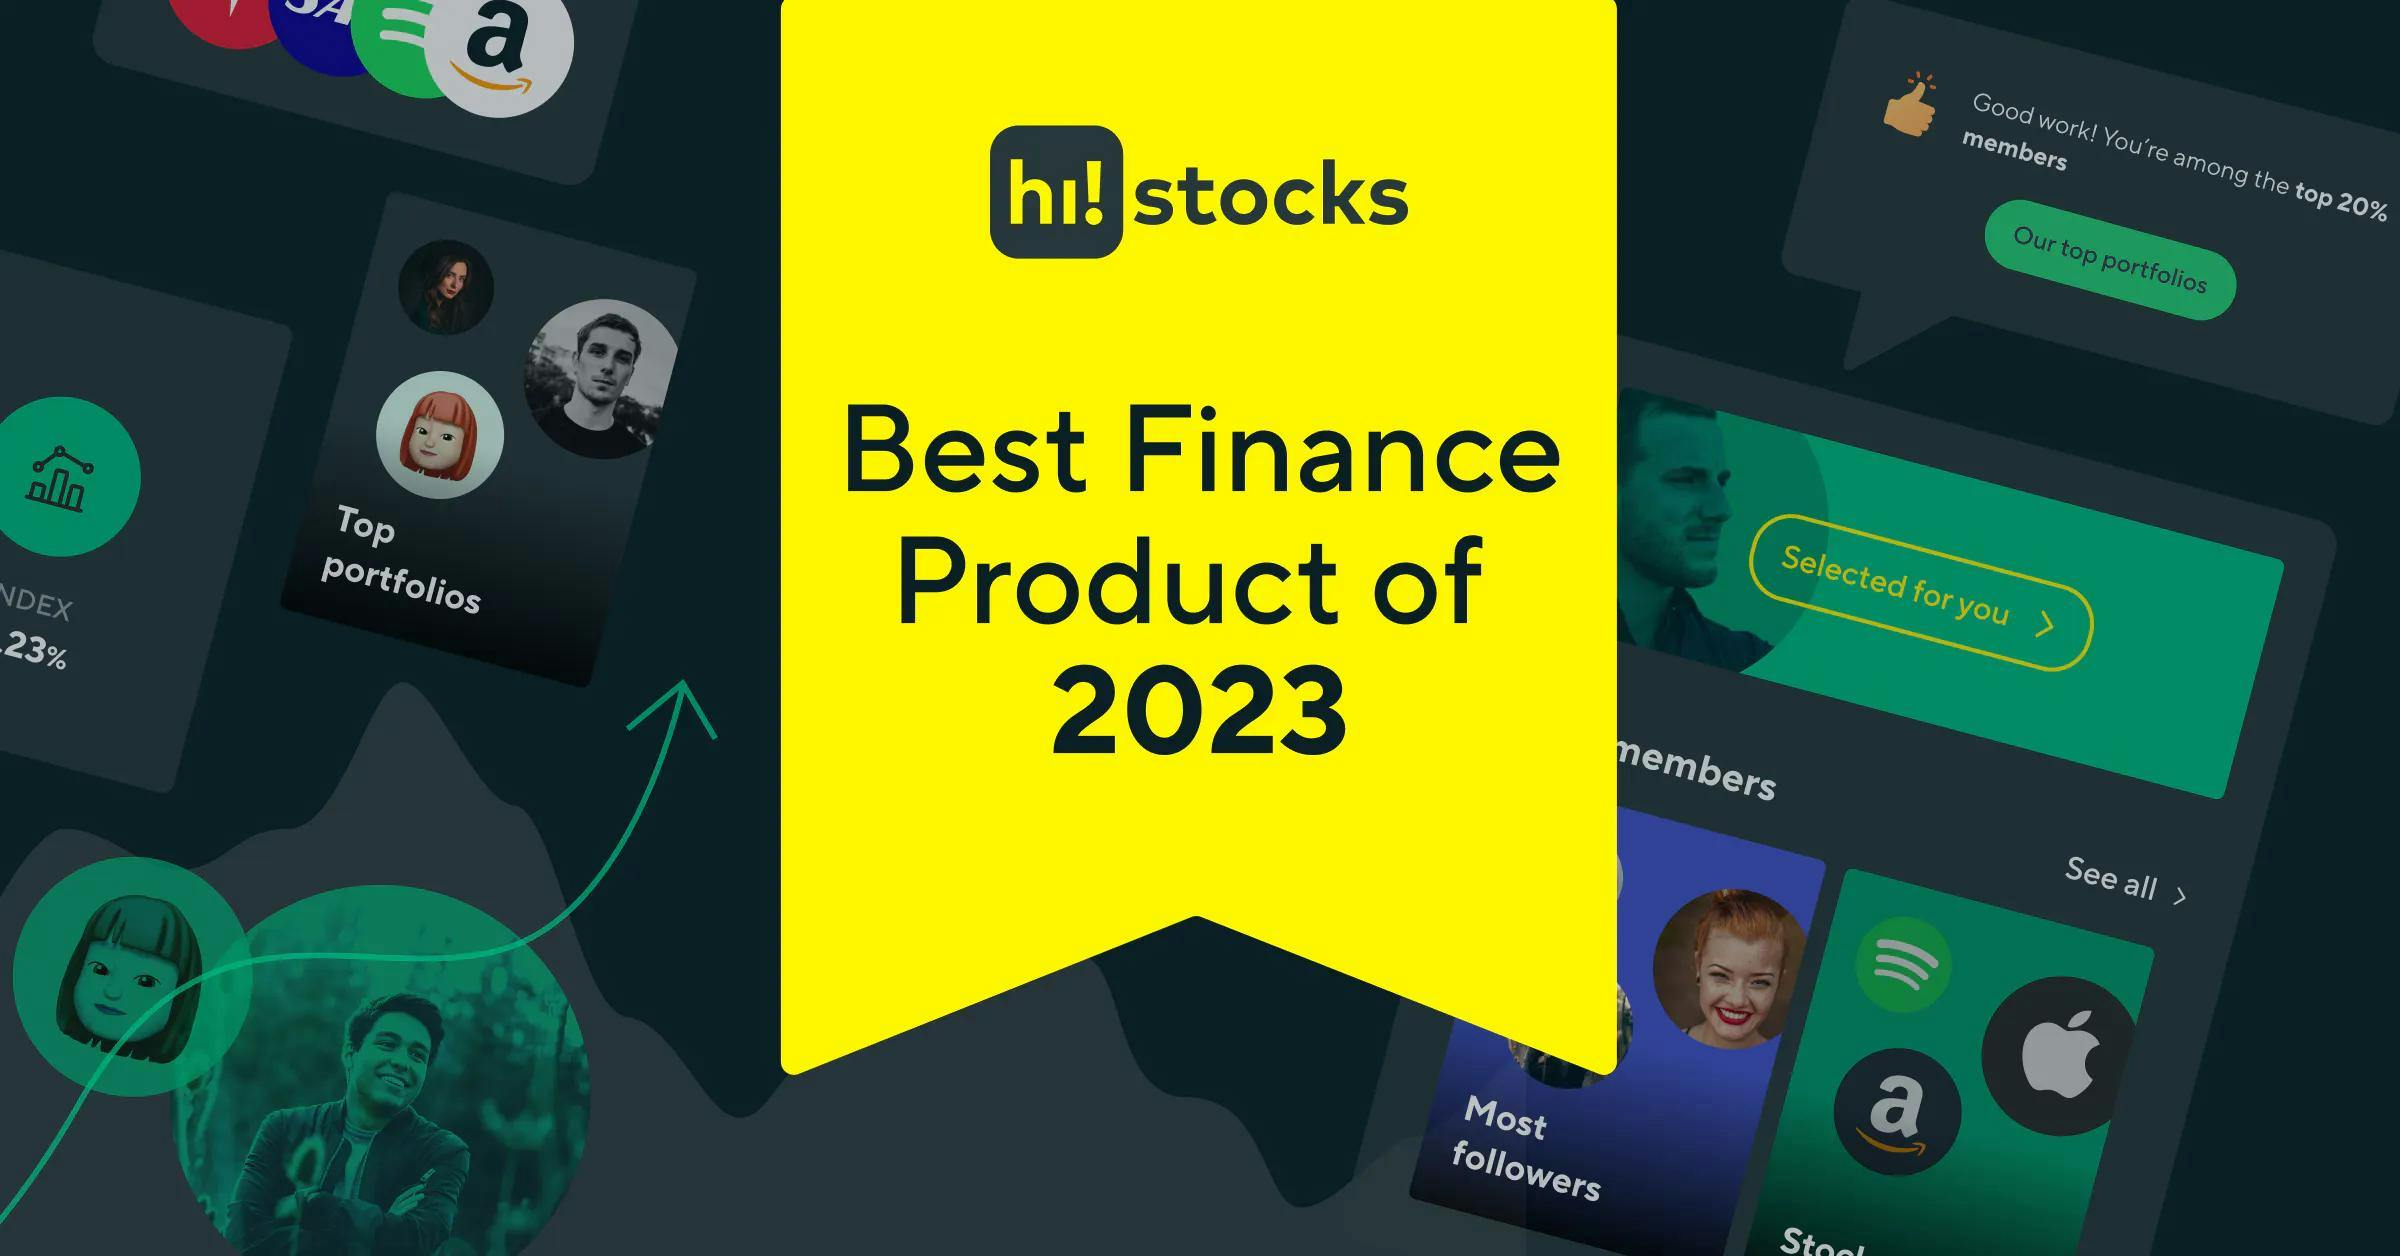 hi!stocks awarded the best finance product of 2023